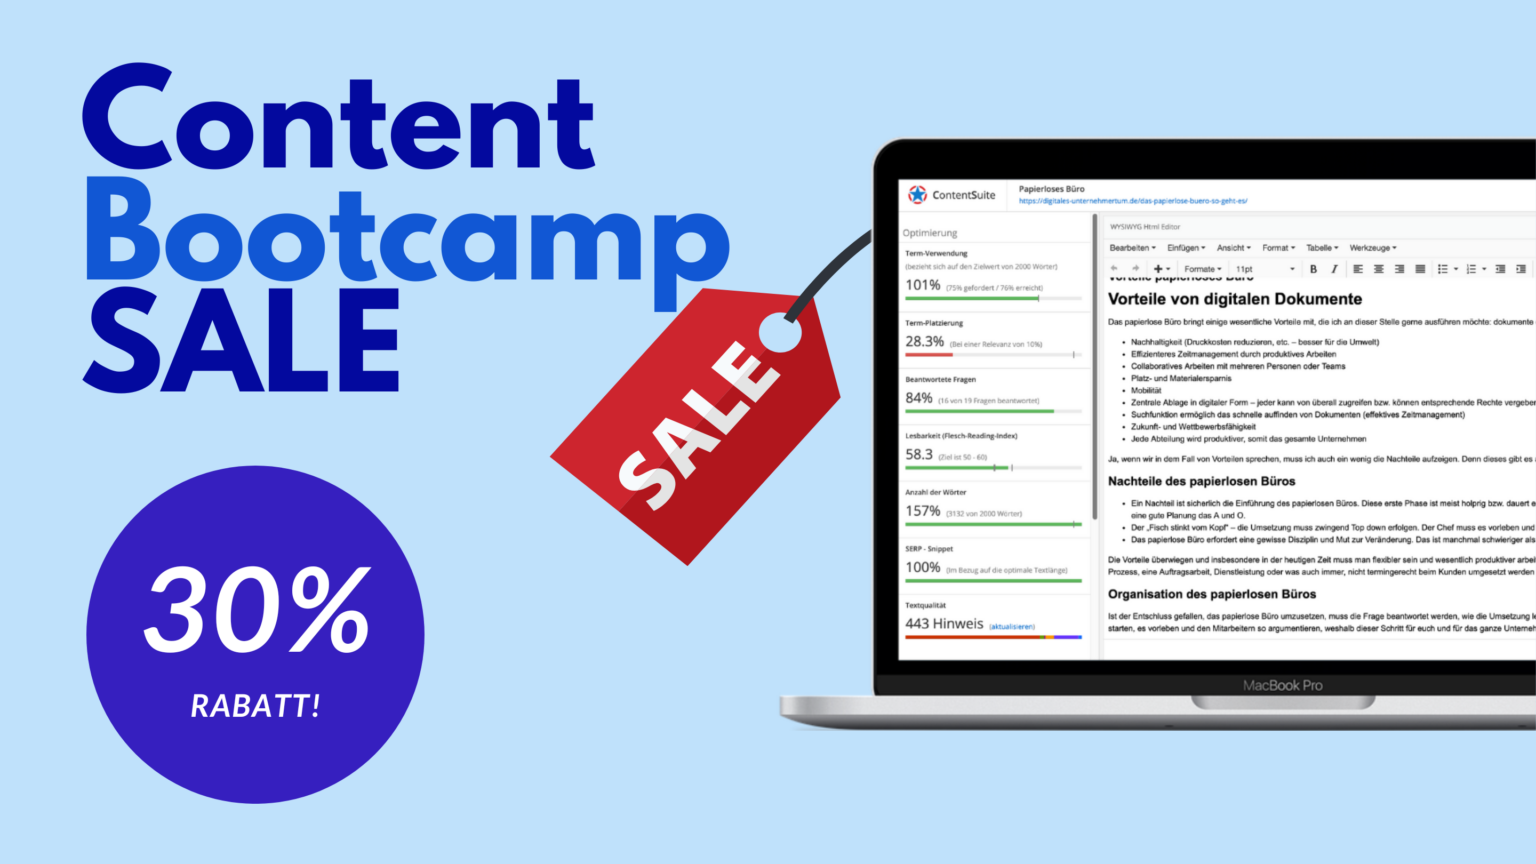 Content Bootcamp Sale